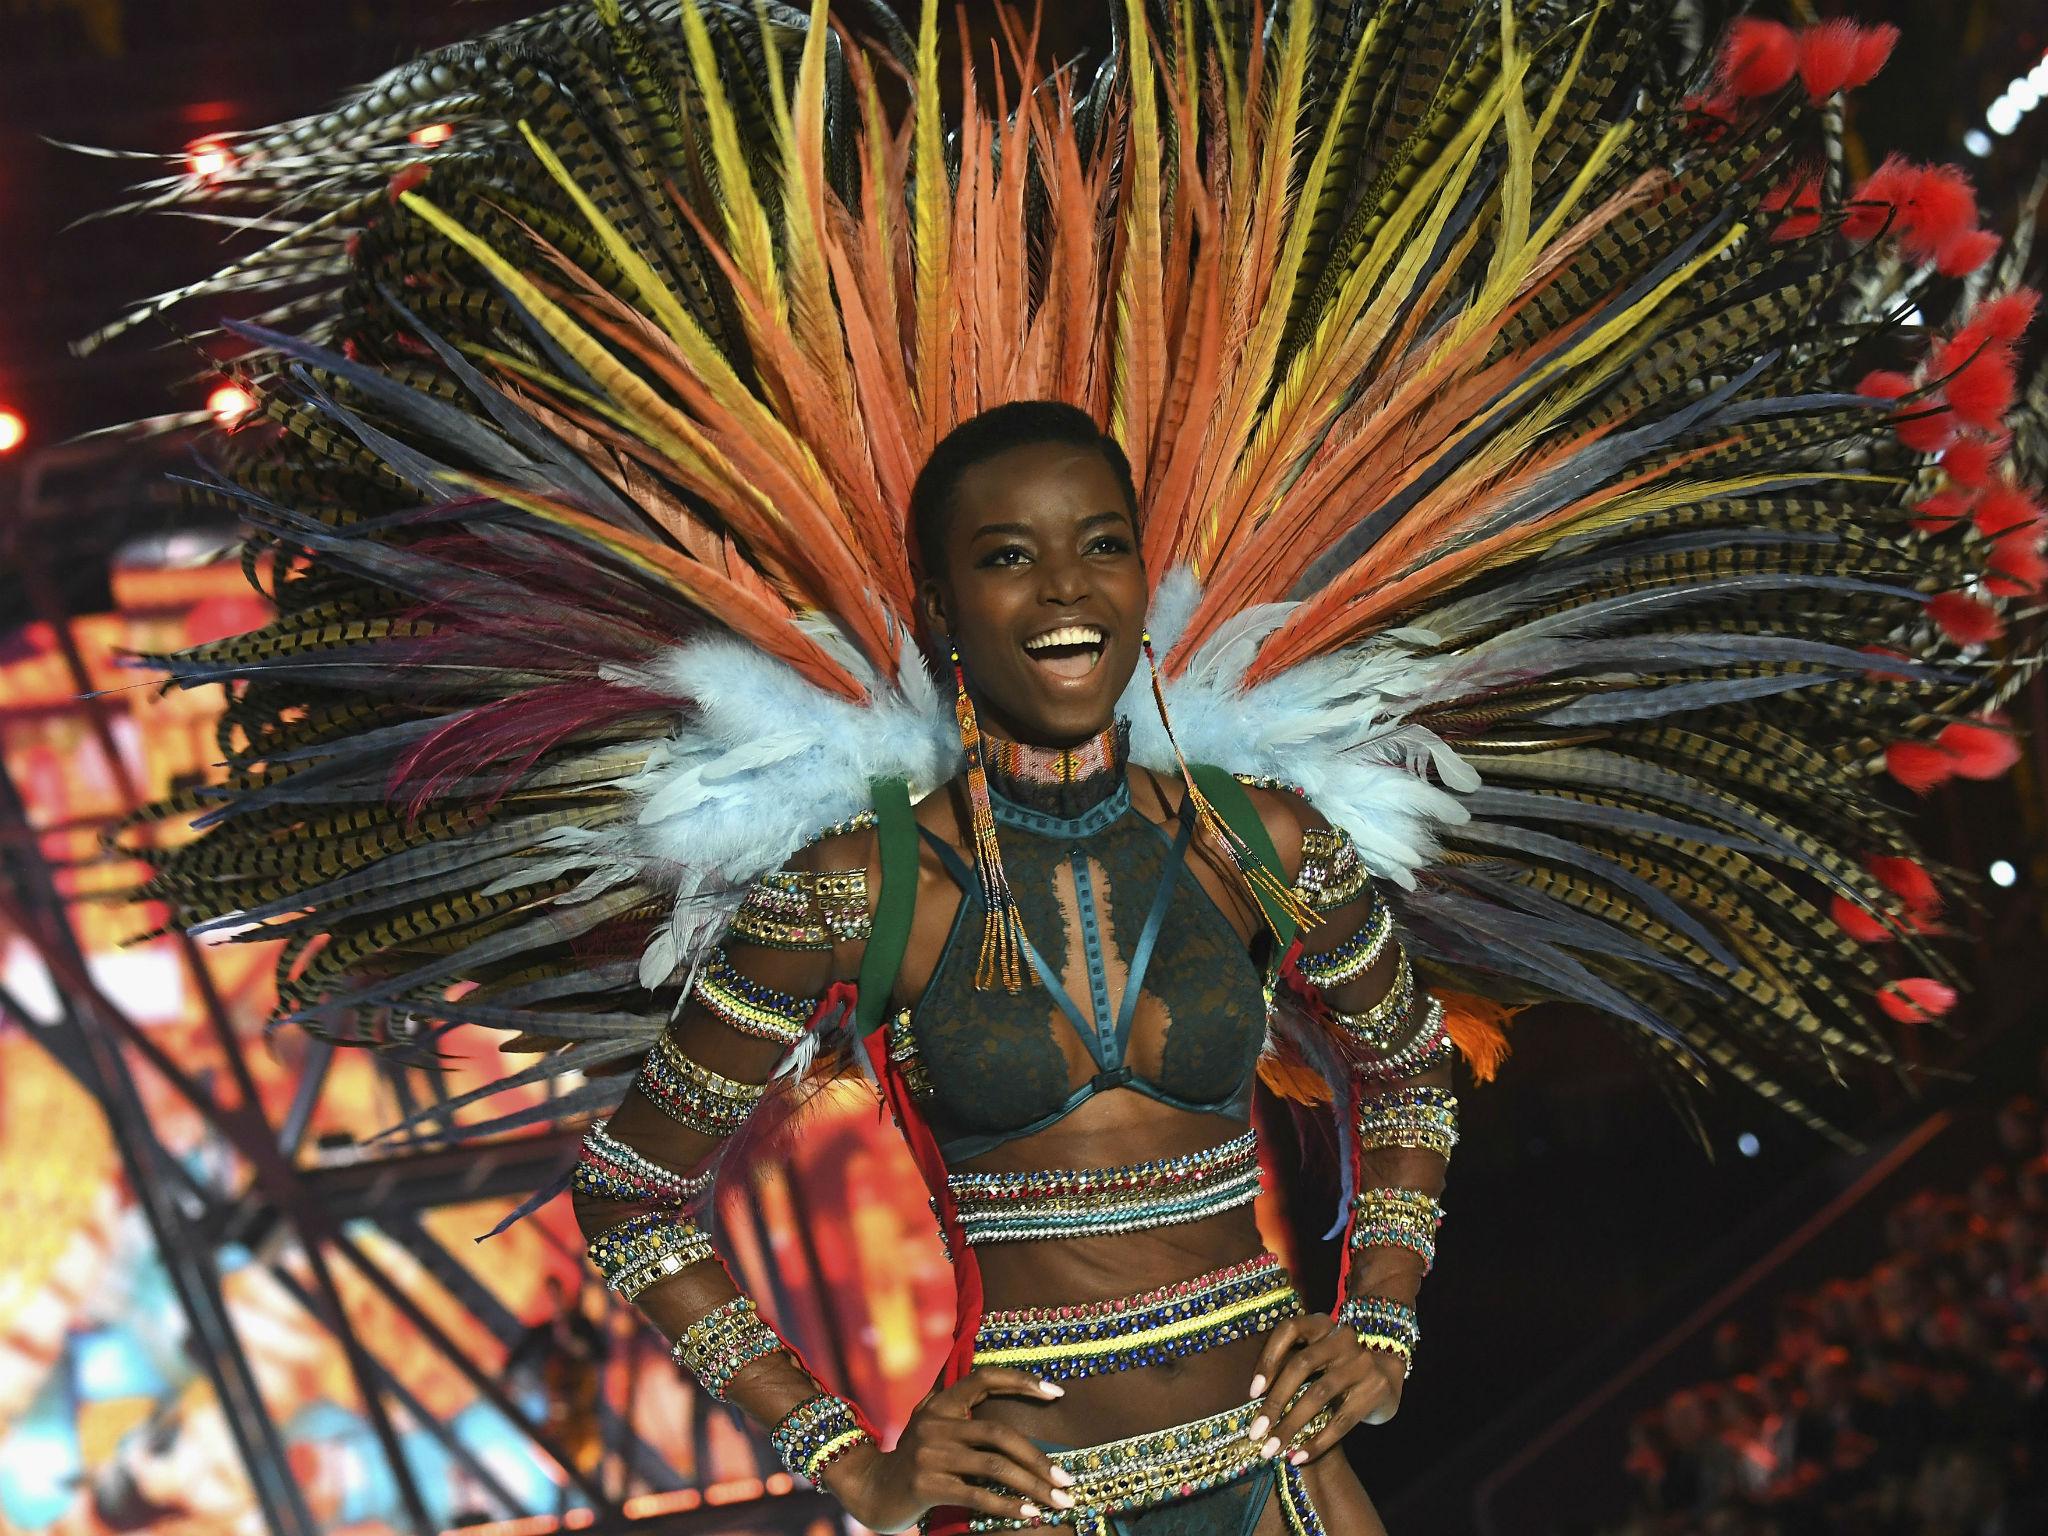 Victoria's Secret model Maria Borges' return to catwalk with natural hair  celebrated, The Independent